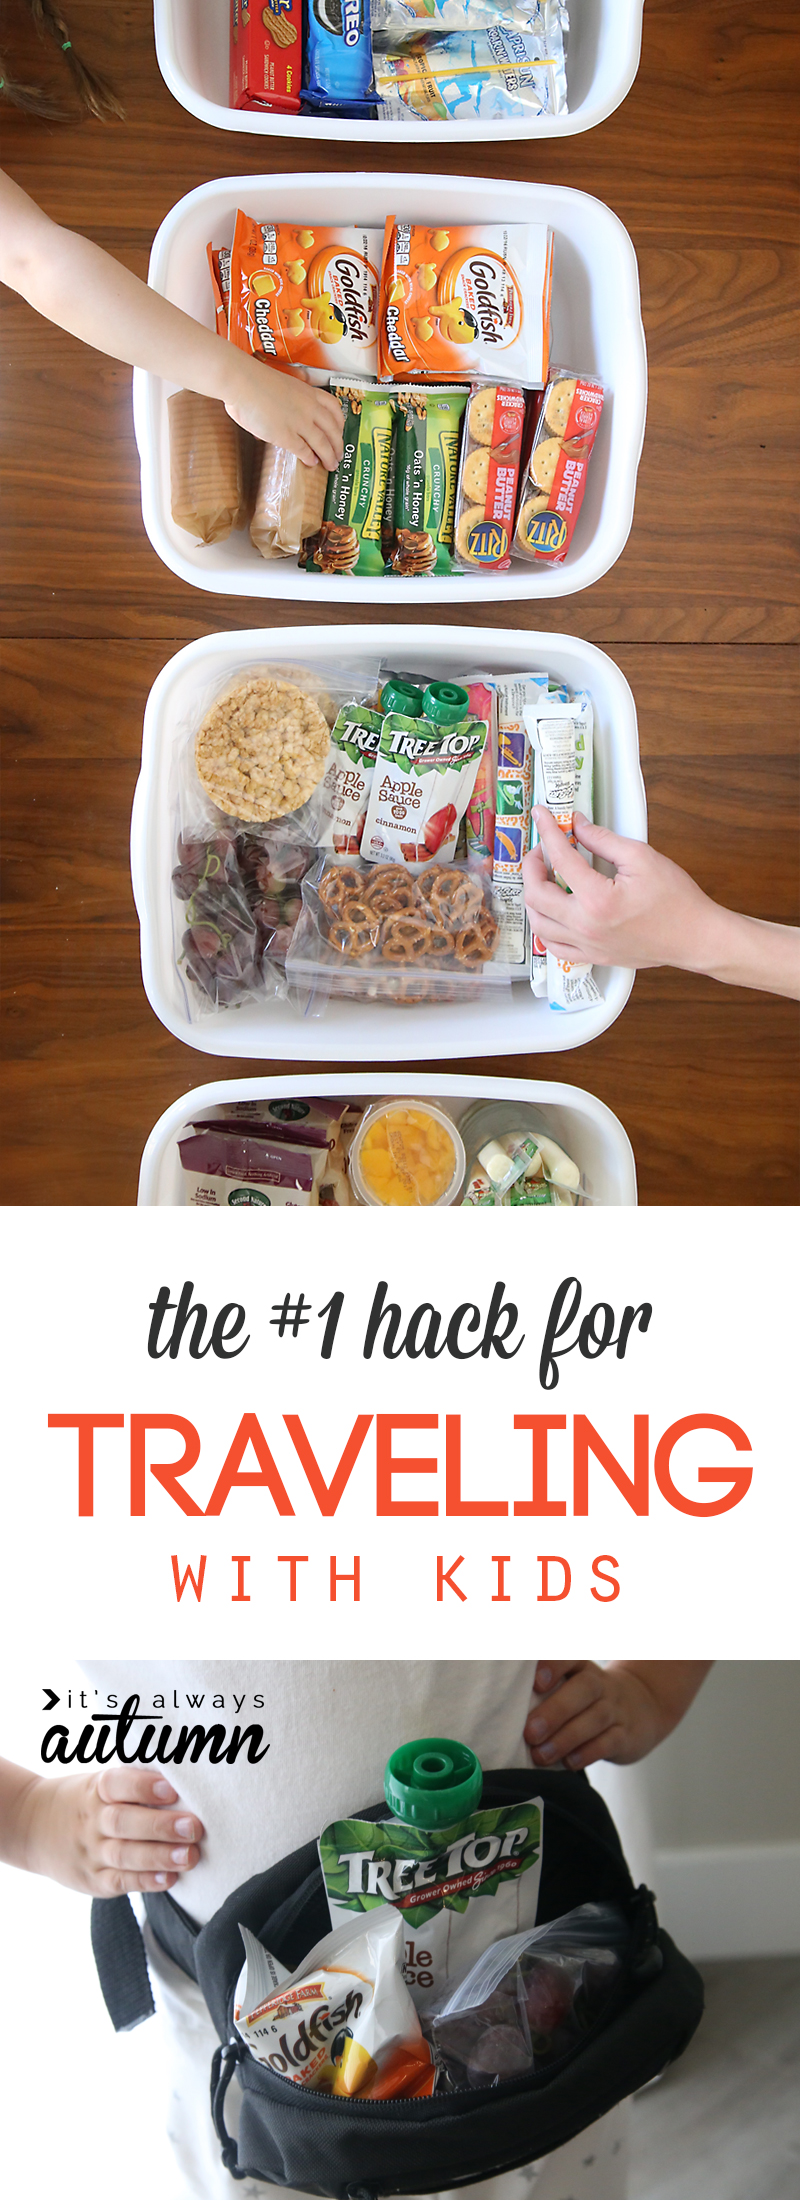 hands grabbing snacks from bins; fanny pack full of snacks traveling with kids hack